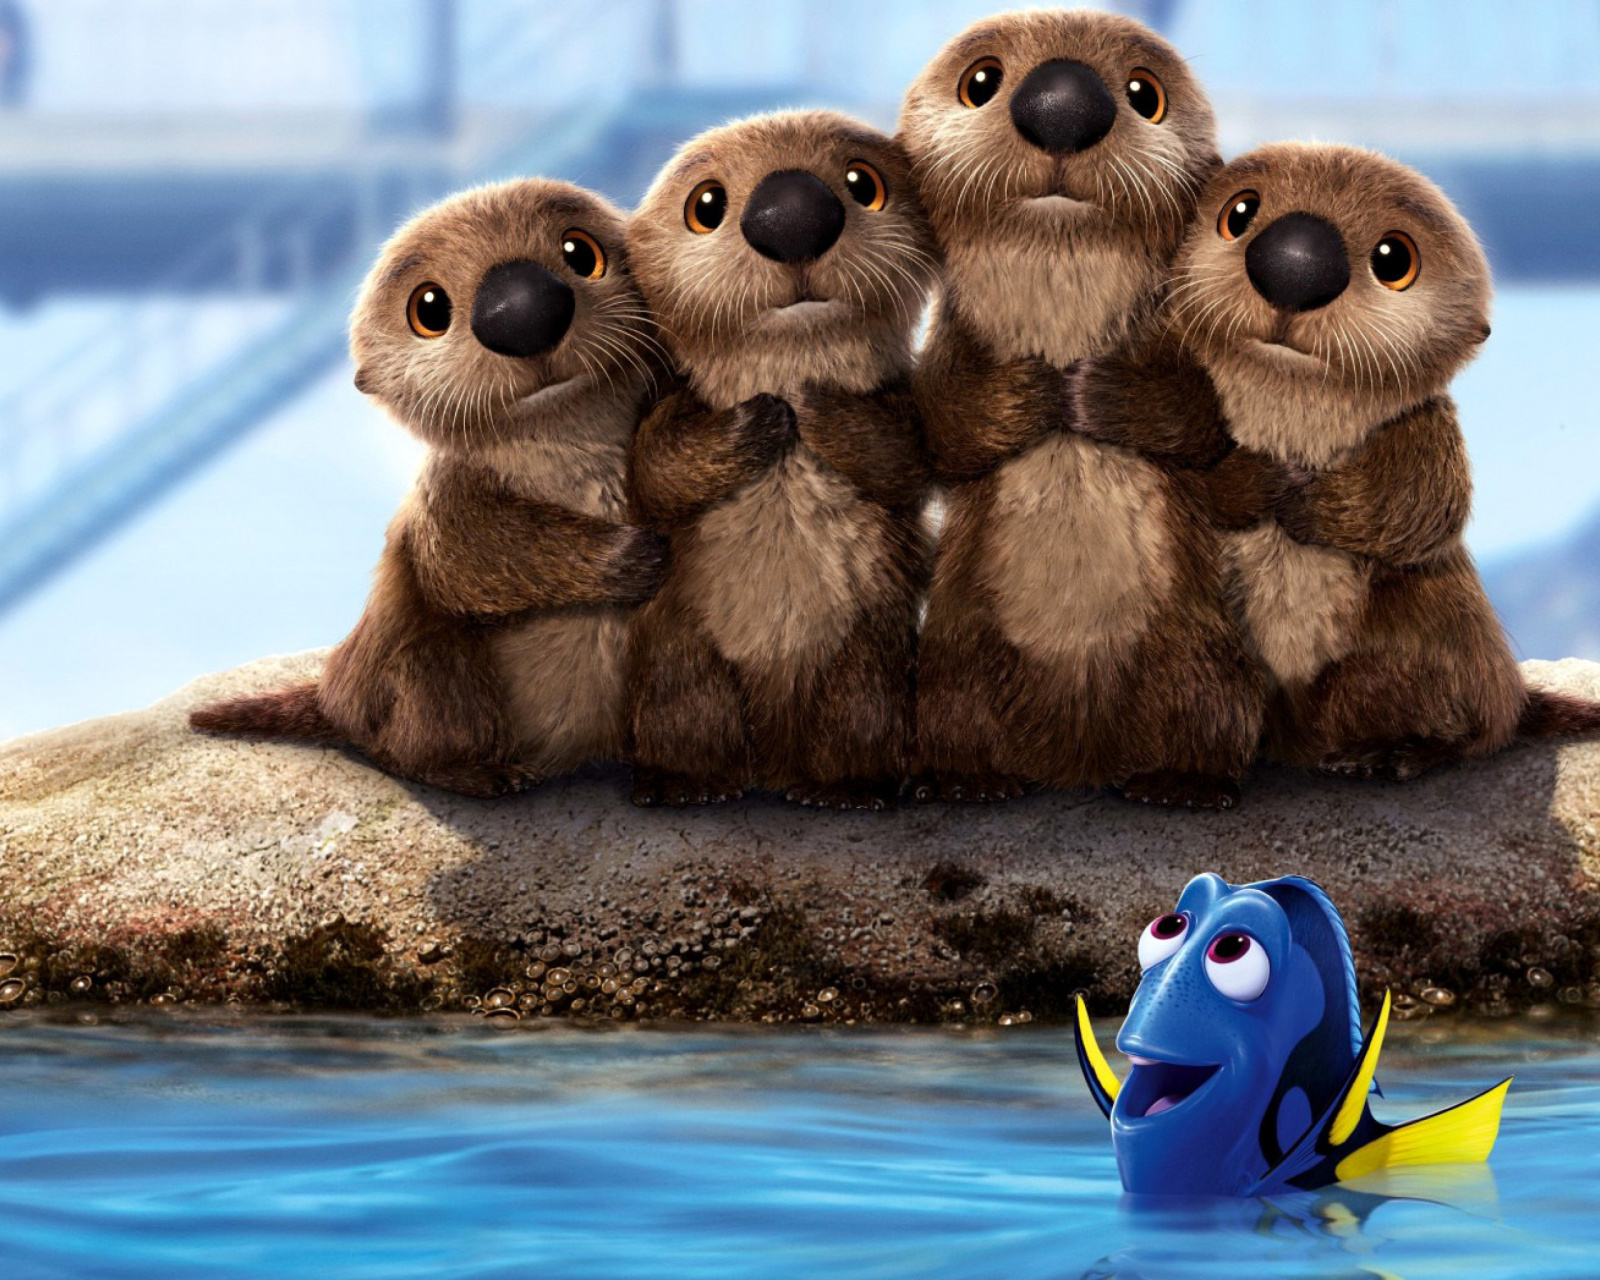 Finding Dory 3D Film with Beavers wallpaper 1600x1280